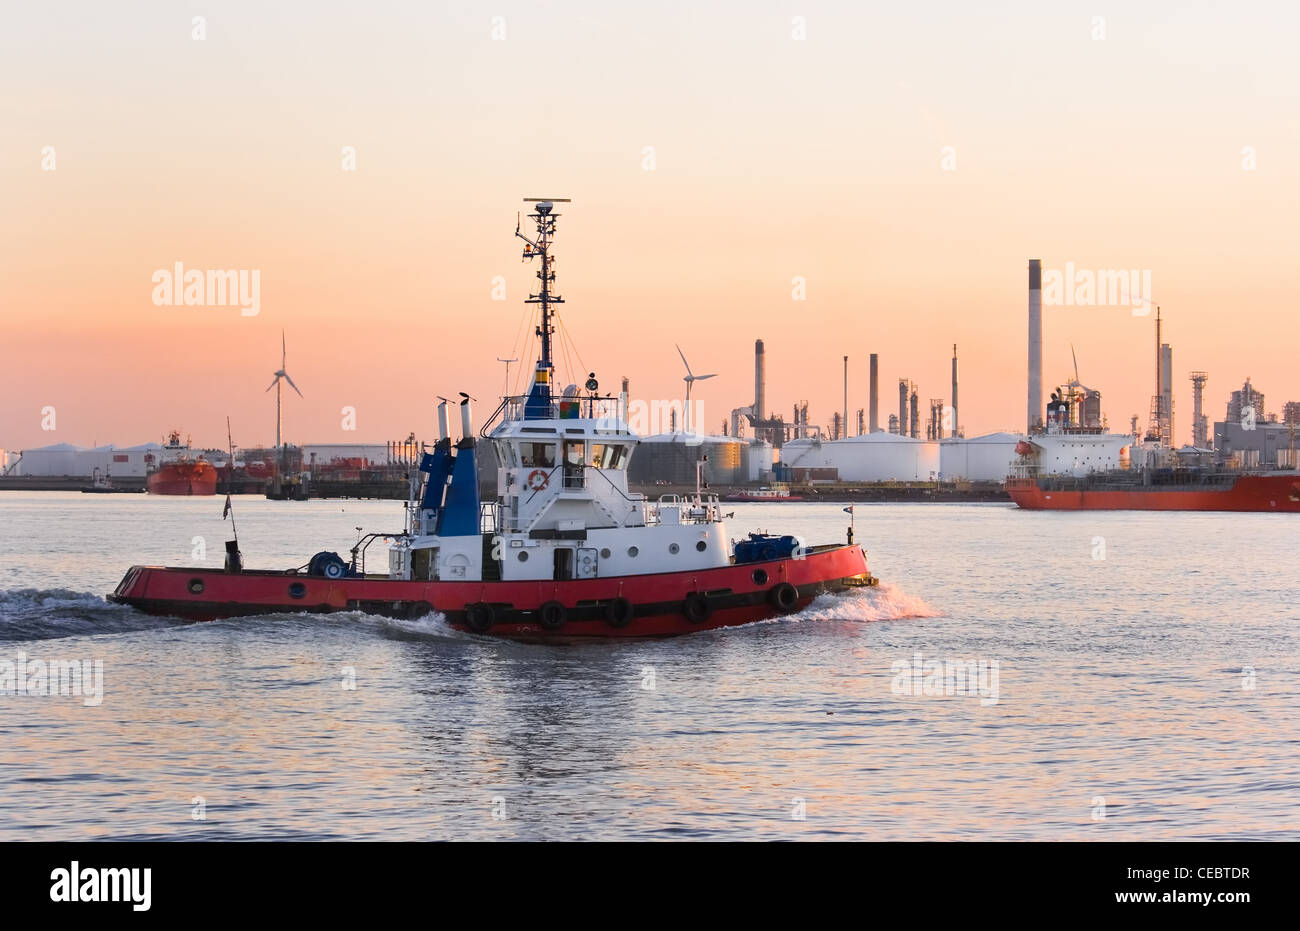 Tug passing by at high speed on the river at colorful sunset - industrial pollution is painting the sky Stock Photo